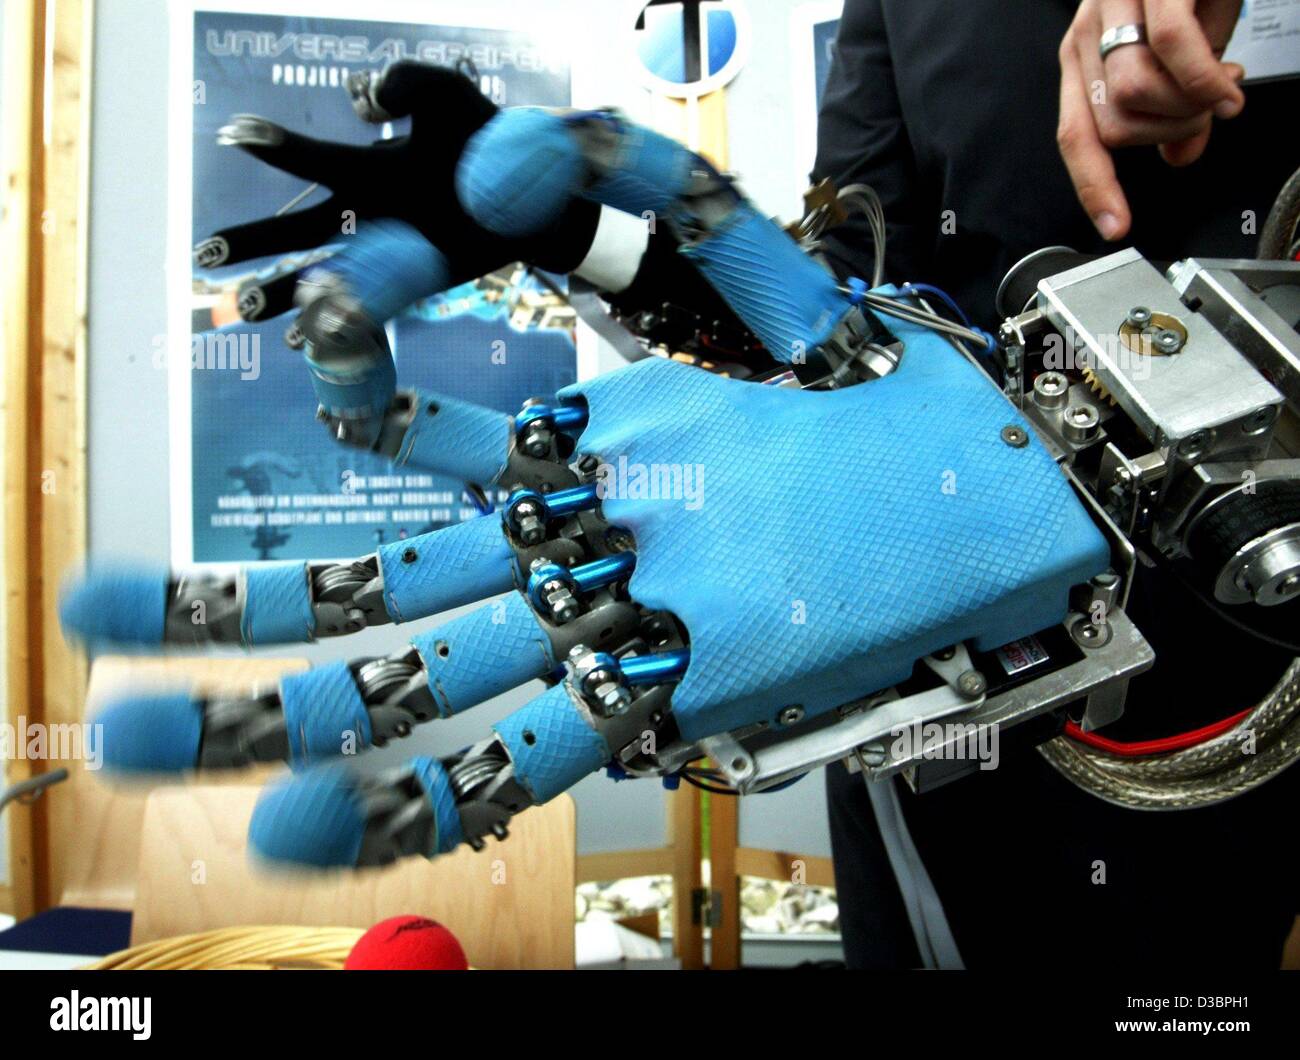 (dpa) - A gripper in the shape of a human hand is presented at the Humanoids 2003 conference in Karlsruhe, Germany, 1 October 2003. The gripper is controlled via a synchronized data glove. Stock Photo